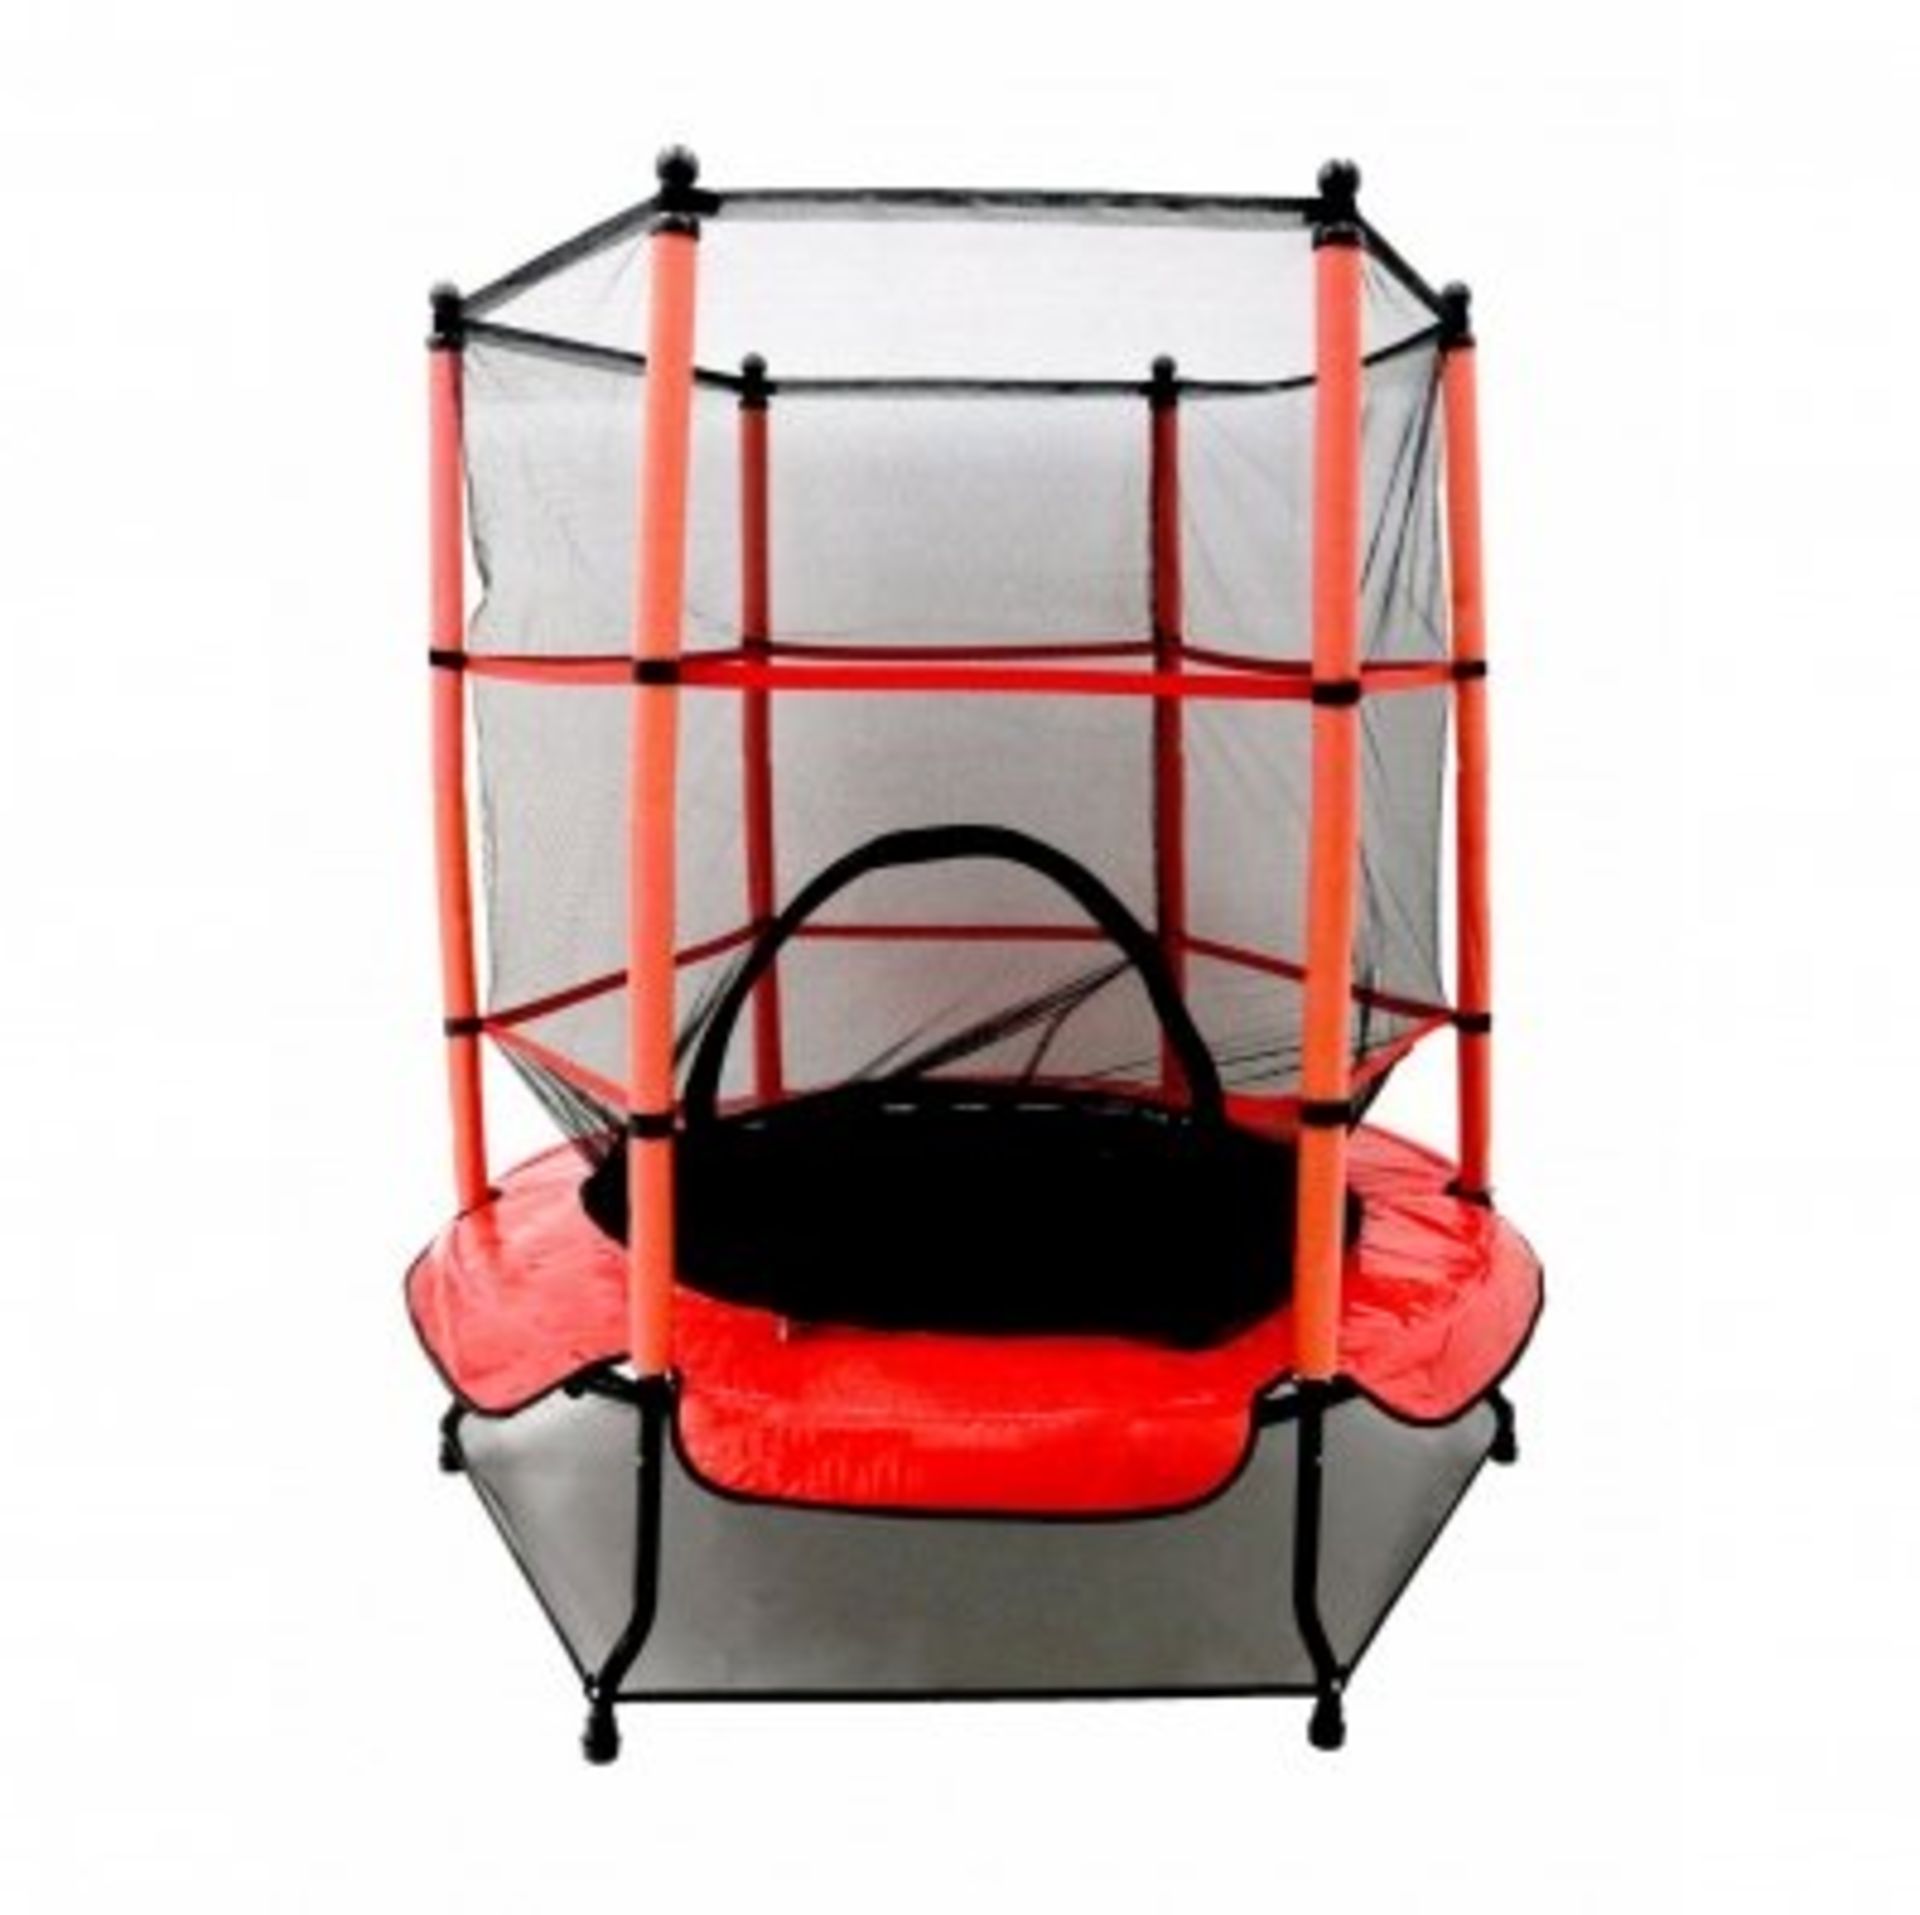 (SK4) 55" Kids Trampoline with Safety Net and Red Cover Garden Outdoor Diameter: 55" - Mat H... - Image 2 of 2